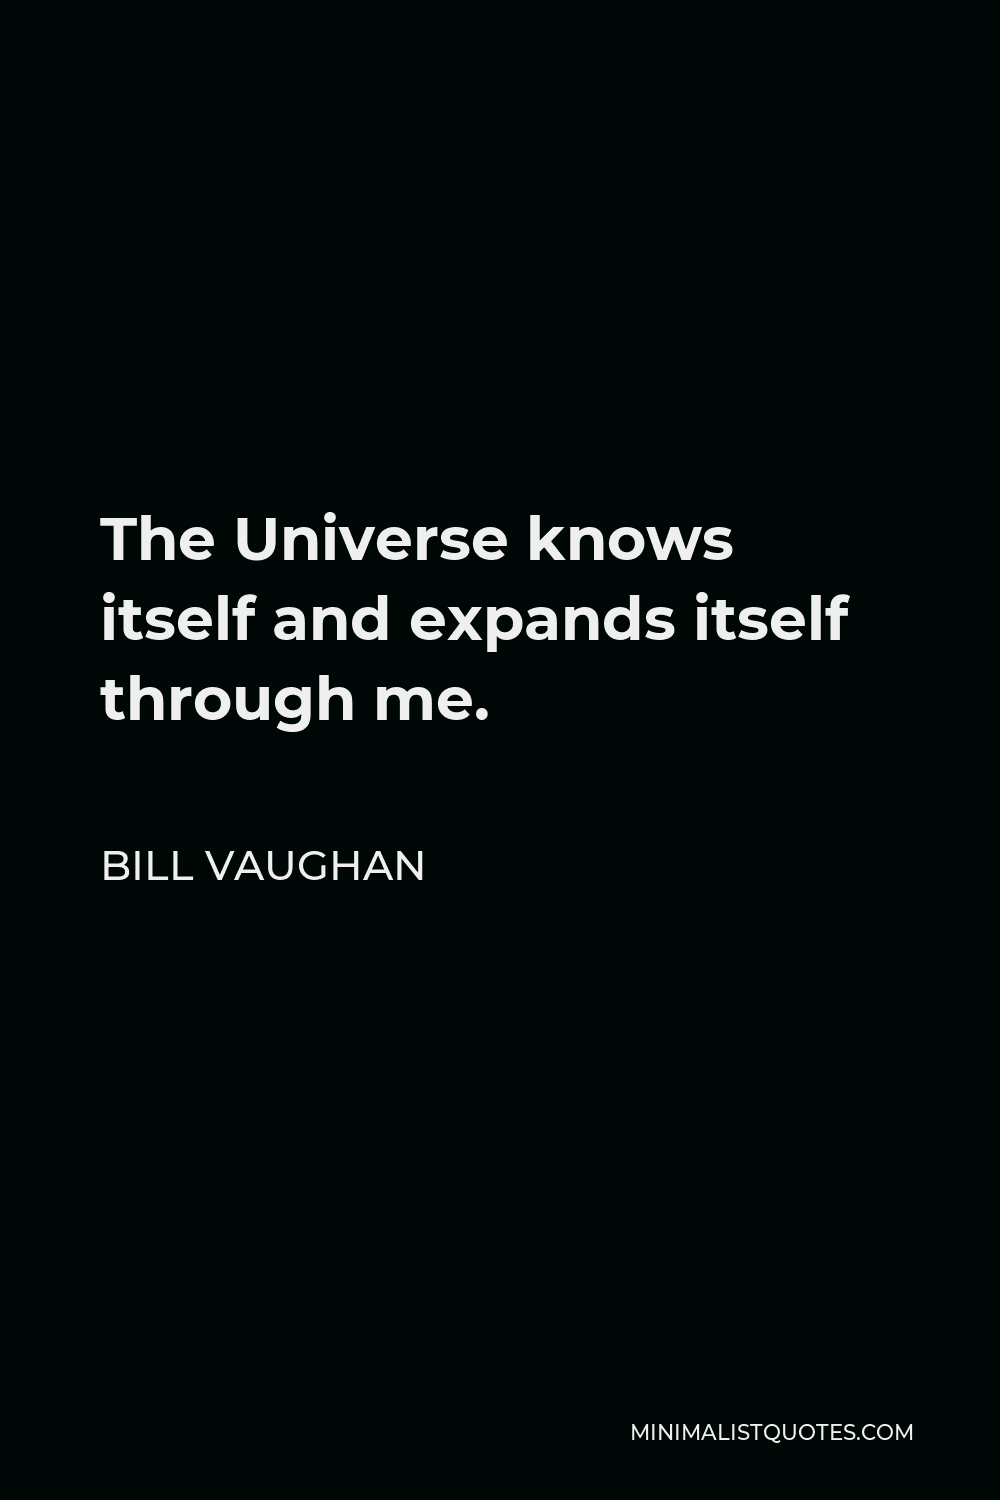 Bill Vaughan Quote - The Universe knows itself and expands itself through me.